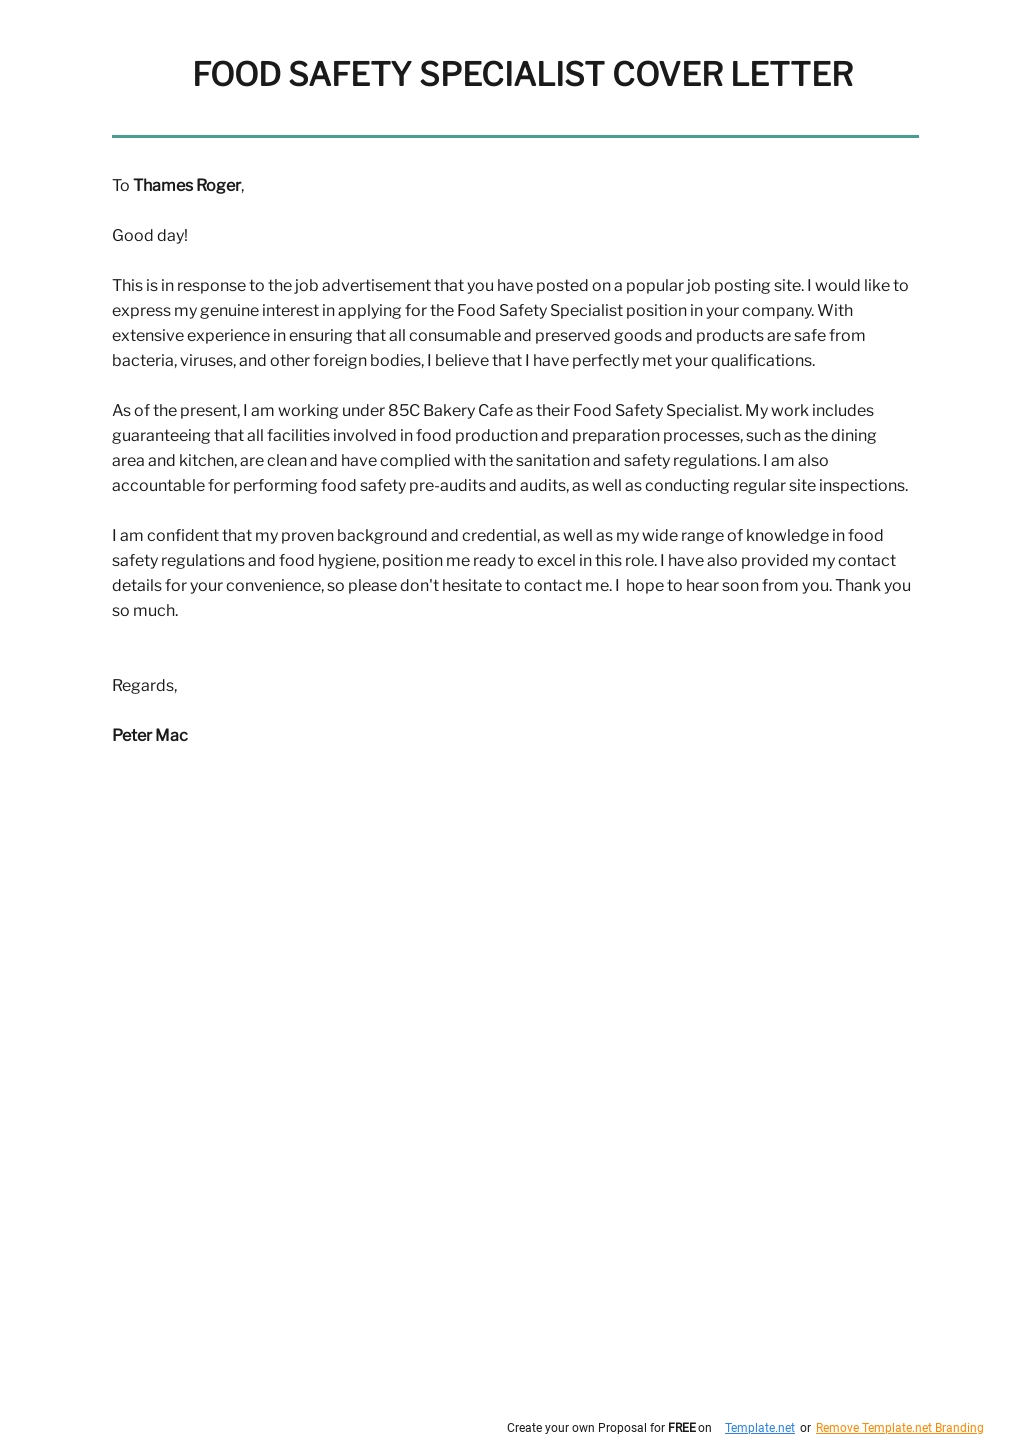 Food Safety Specialist Cover Letter Template.jpe